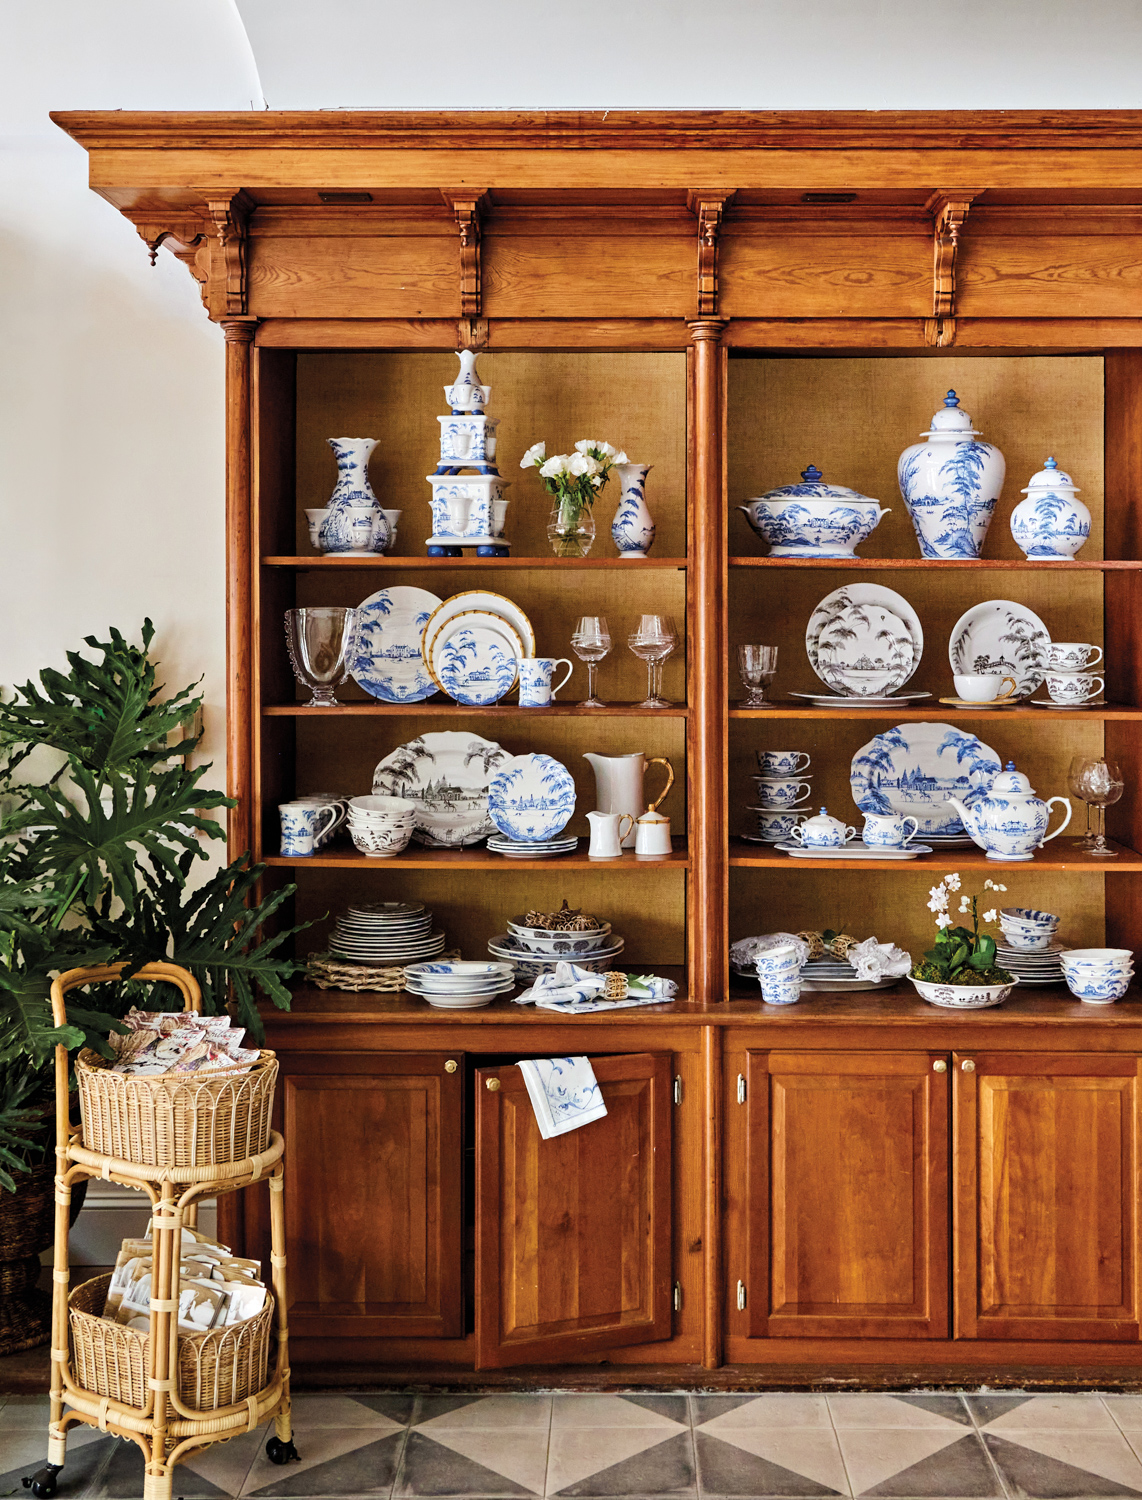 Juliska interior with large wood china cabinet filled with blue-and-white dishes, vases and cannisters